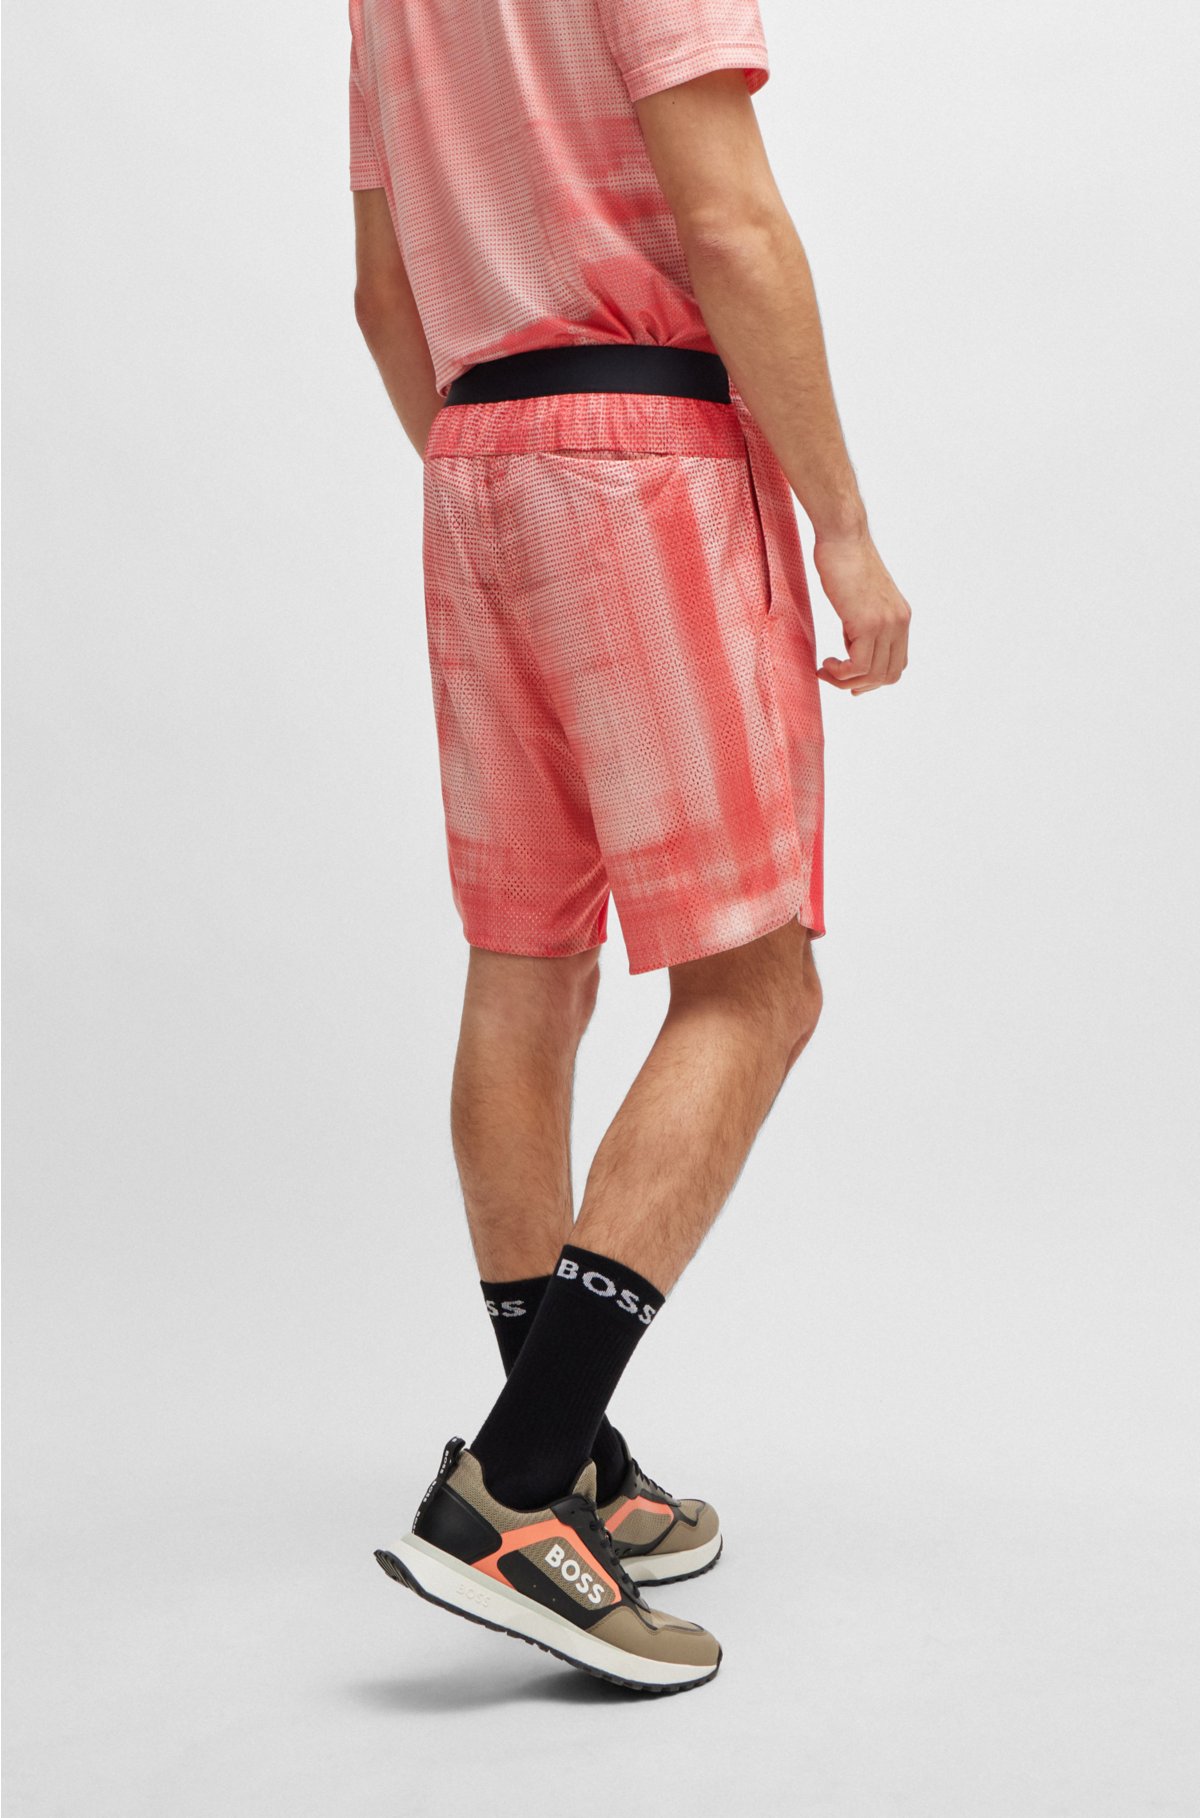 Printed-mesh shorts with logo detail, Light Red